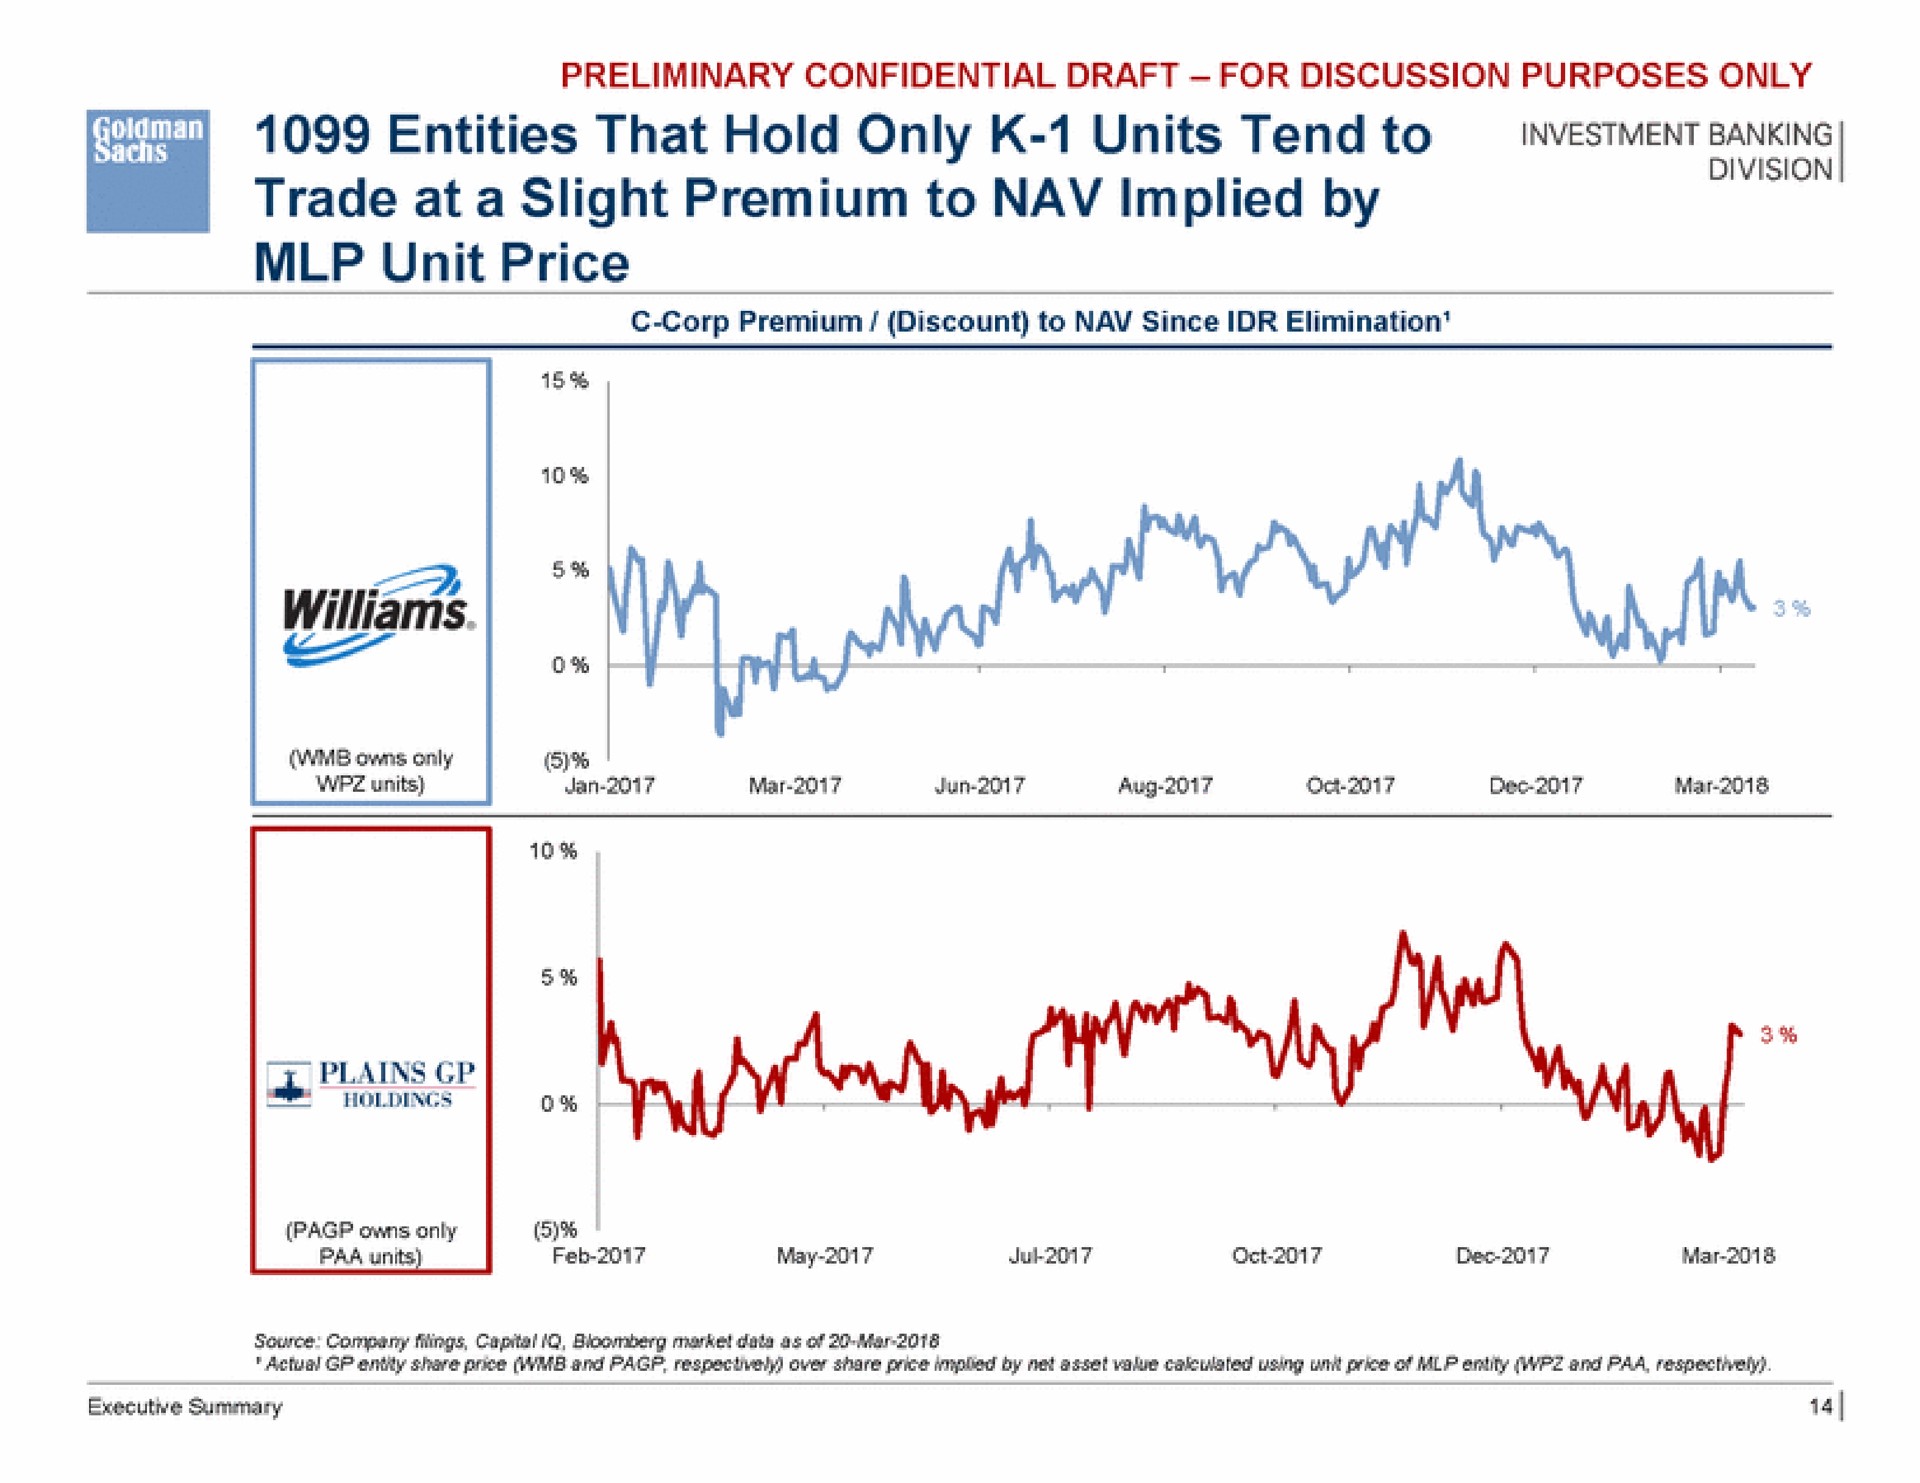 entities that hold only units tend to trade at a slight premium to implied by unit price | Goldman Sachs